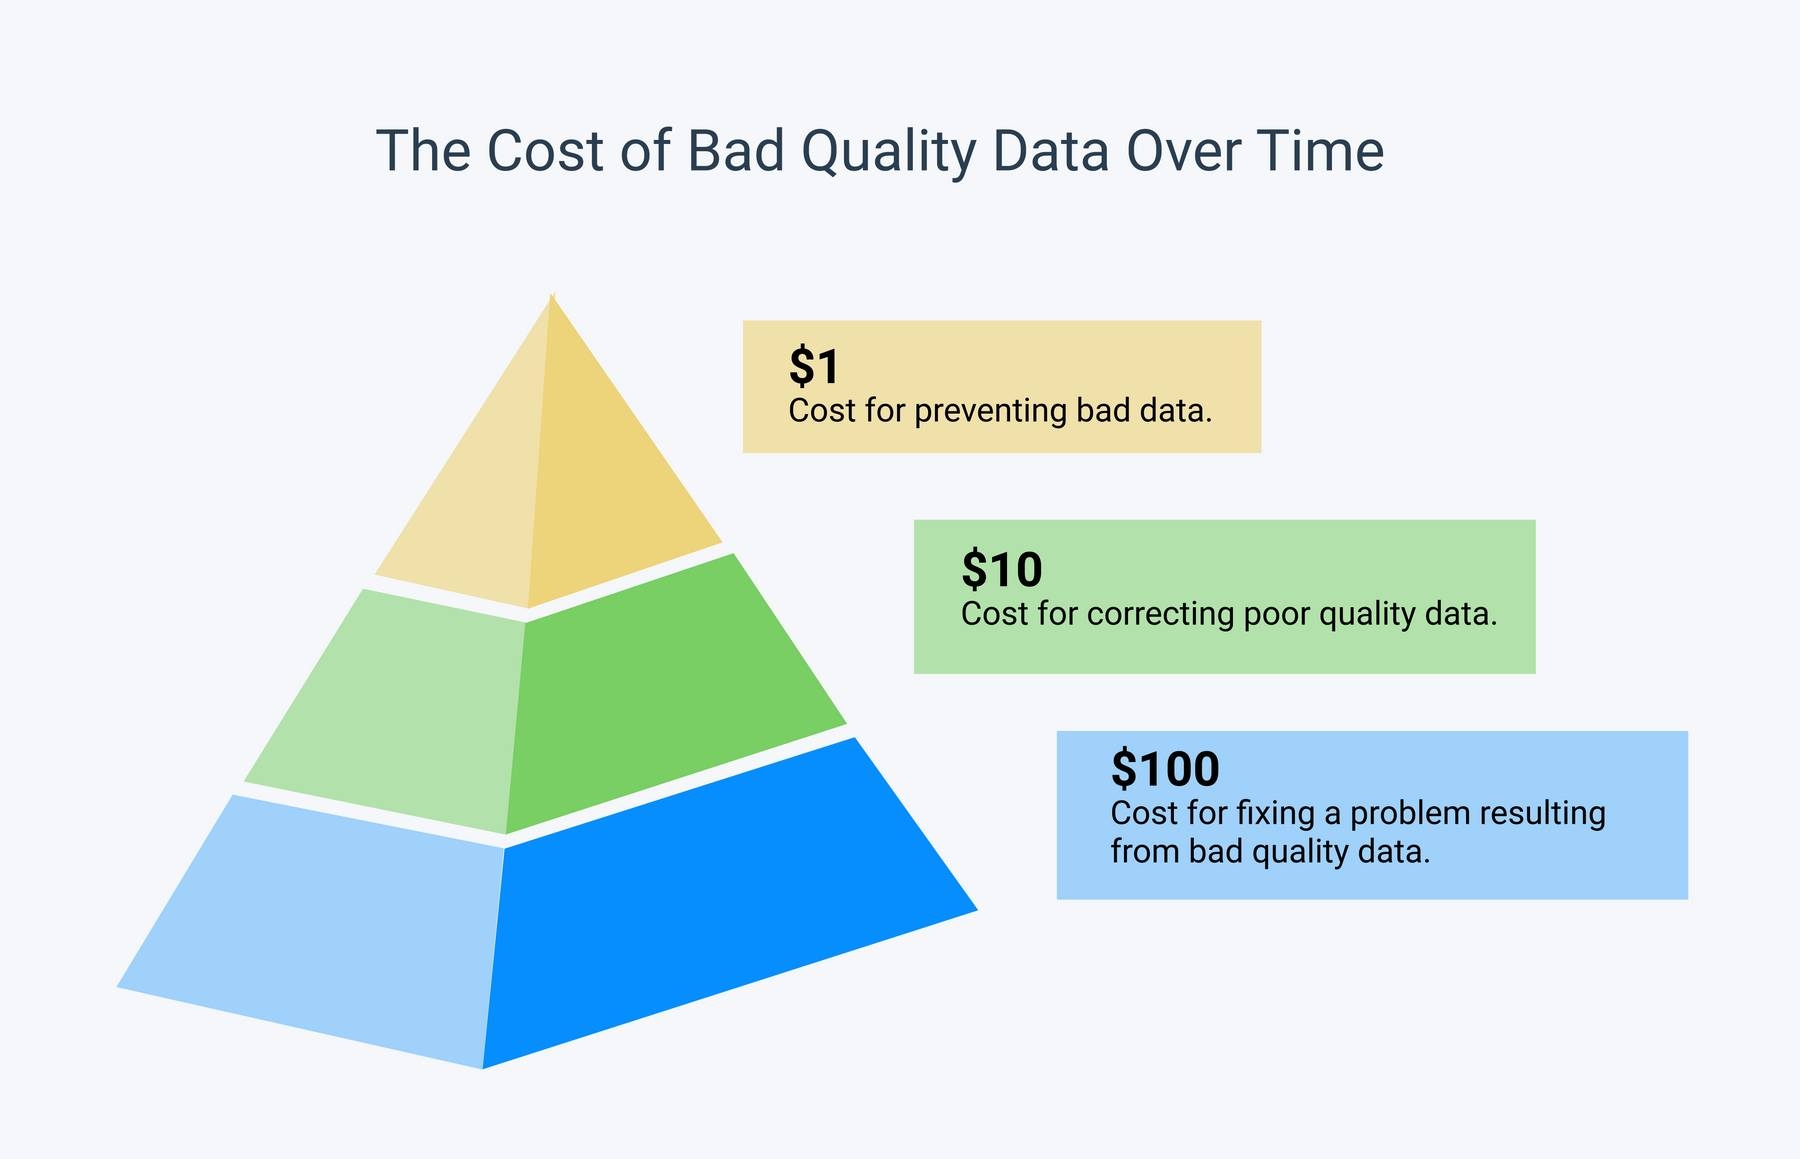 The cost of bad quality data over time: $1 is the cost of preventing bad data. $10 is the cost of correcting bad data. $100 is the cost of fixing a problem resulting from bad data.